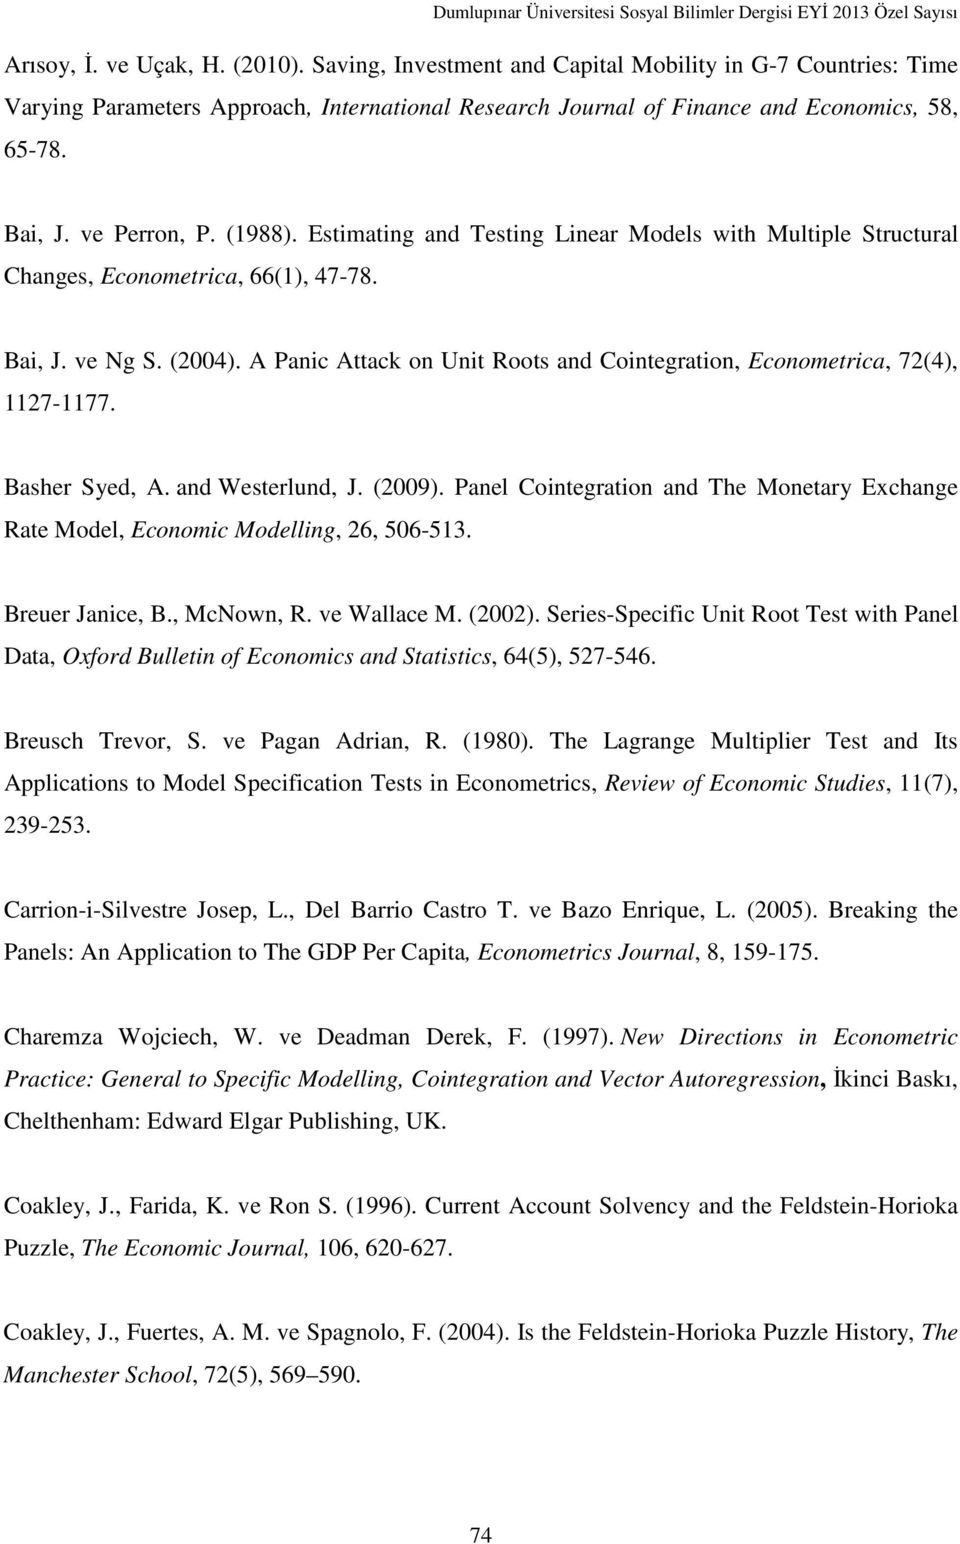 A Panic Attack on Unit Roots and Cointegration, Econometrica, 72(4), 1127-1177. Basher Syed, A. and Westerlund, J. (2009).